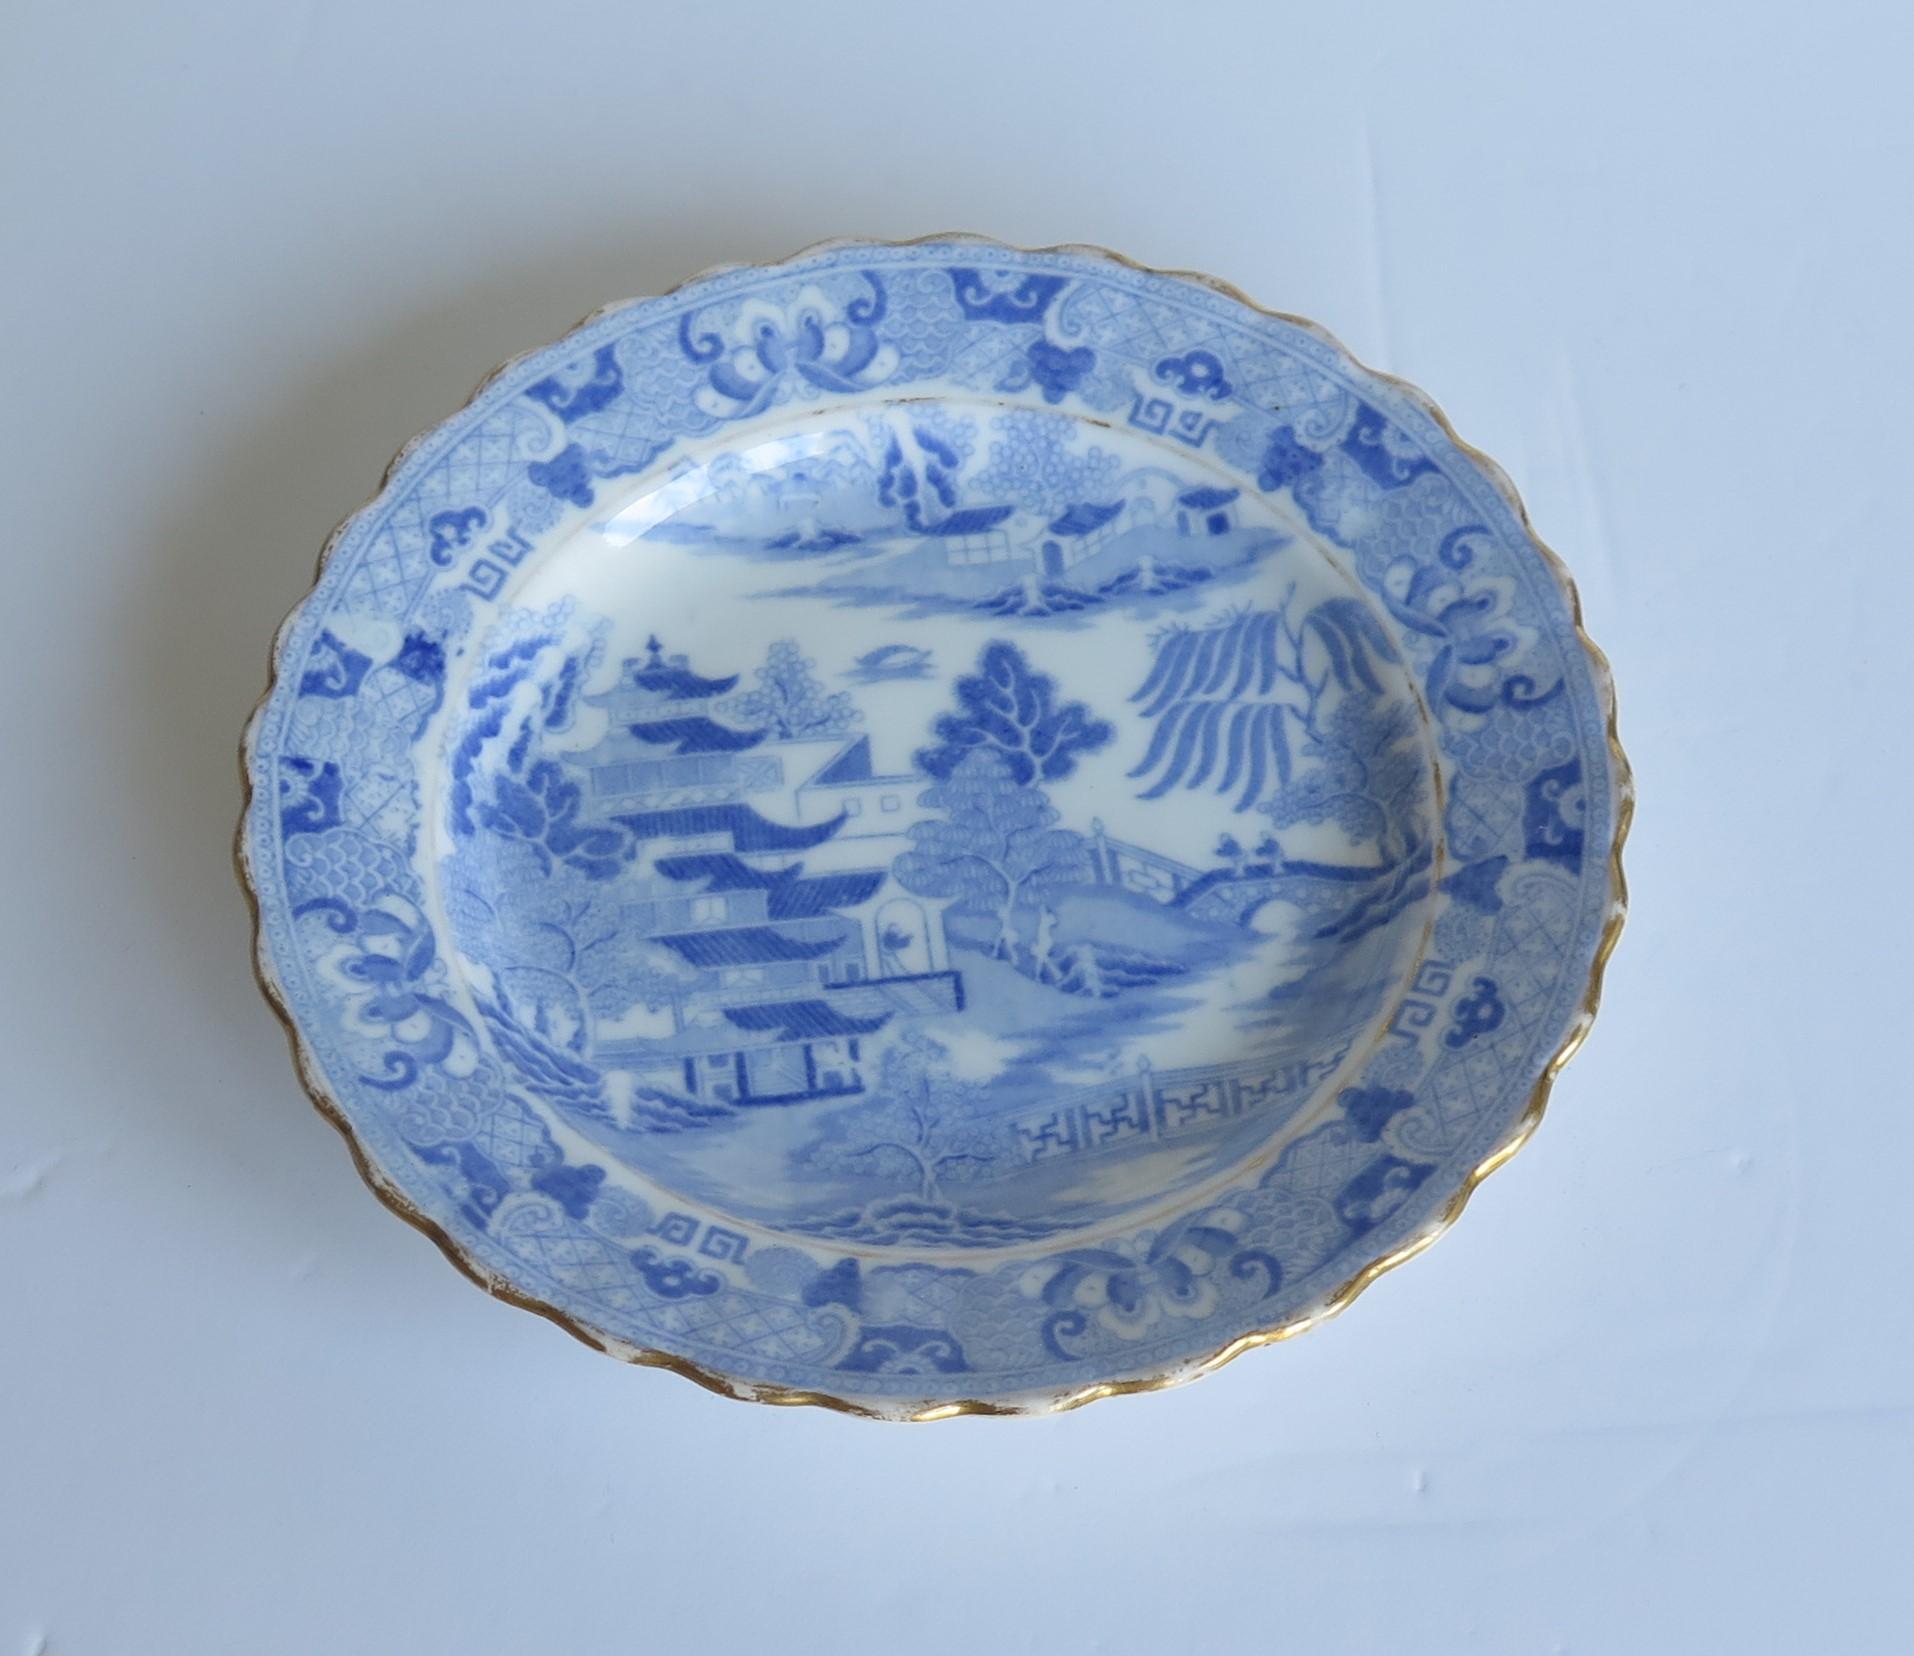 Chinoiserie Early Miles Mason Desert Dish or Plate Blue and White Boy at the Door Pattern